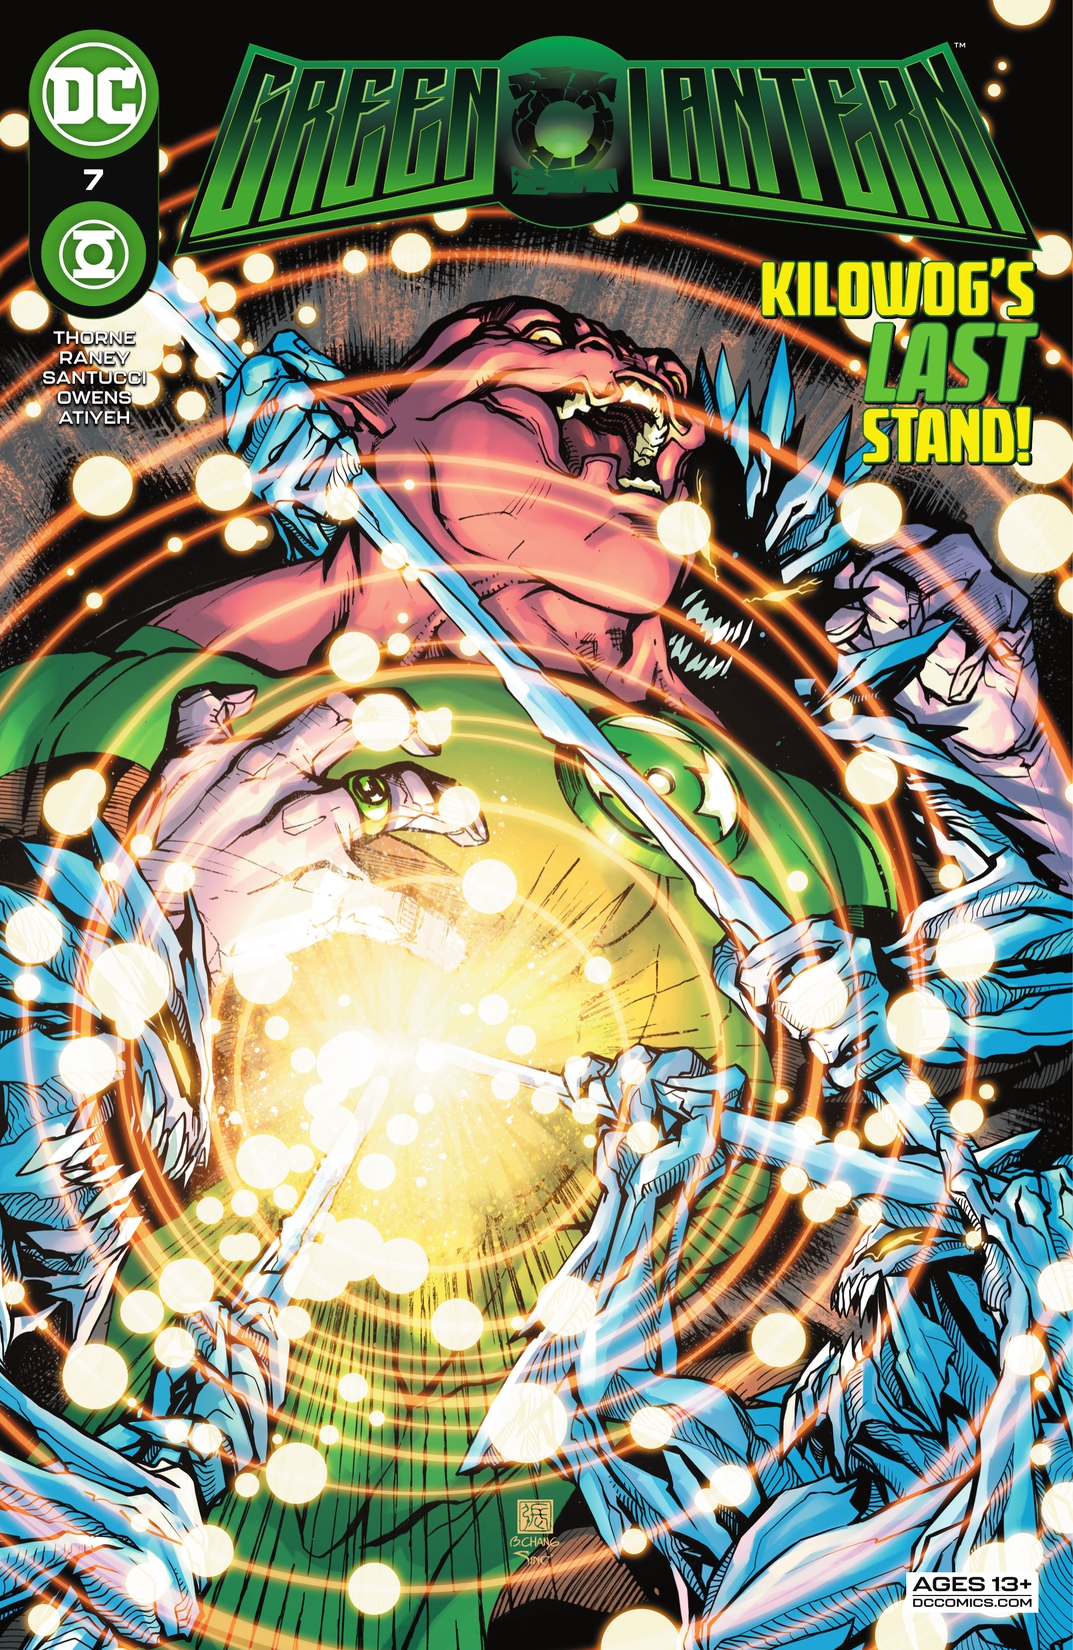 Green Lantern (2021-) #7 preview images